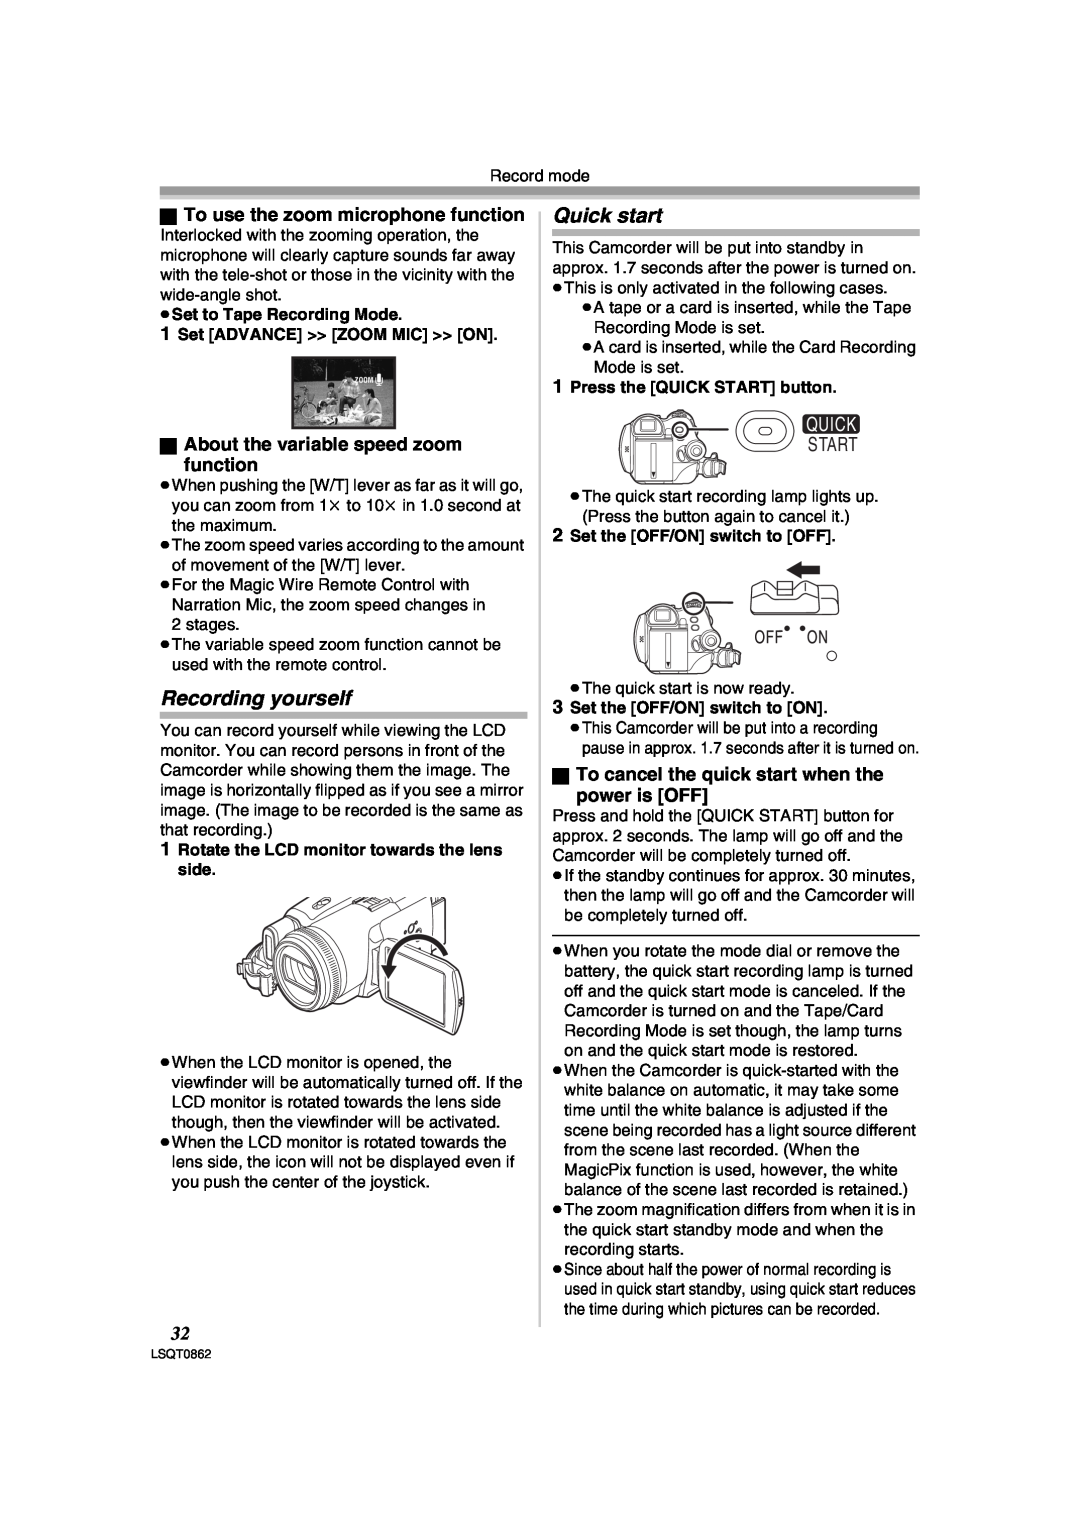 Panasonic PV-GS250 operating instructions Recording yourself, Quick start, ª To use the zoom microphone function, Start 